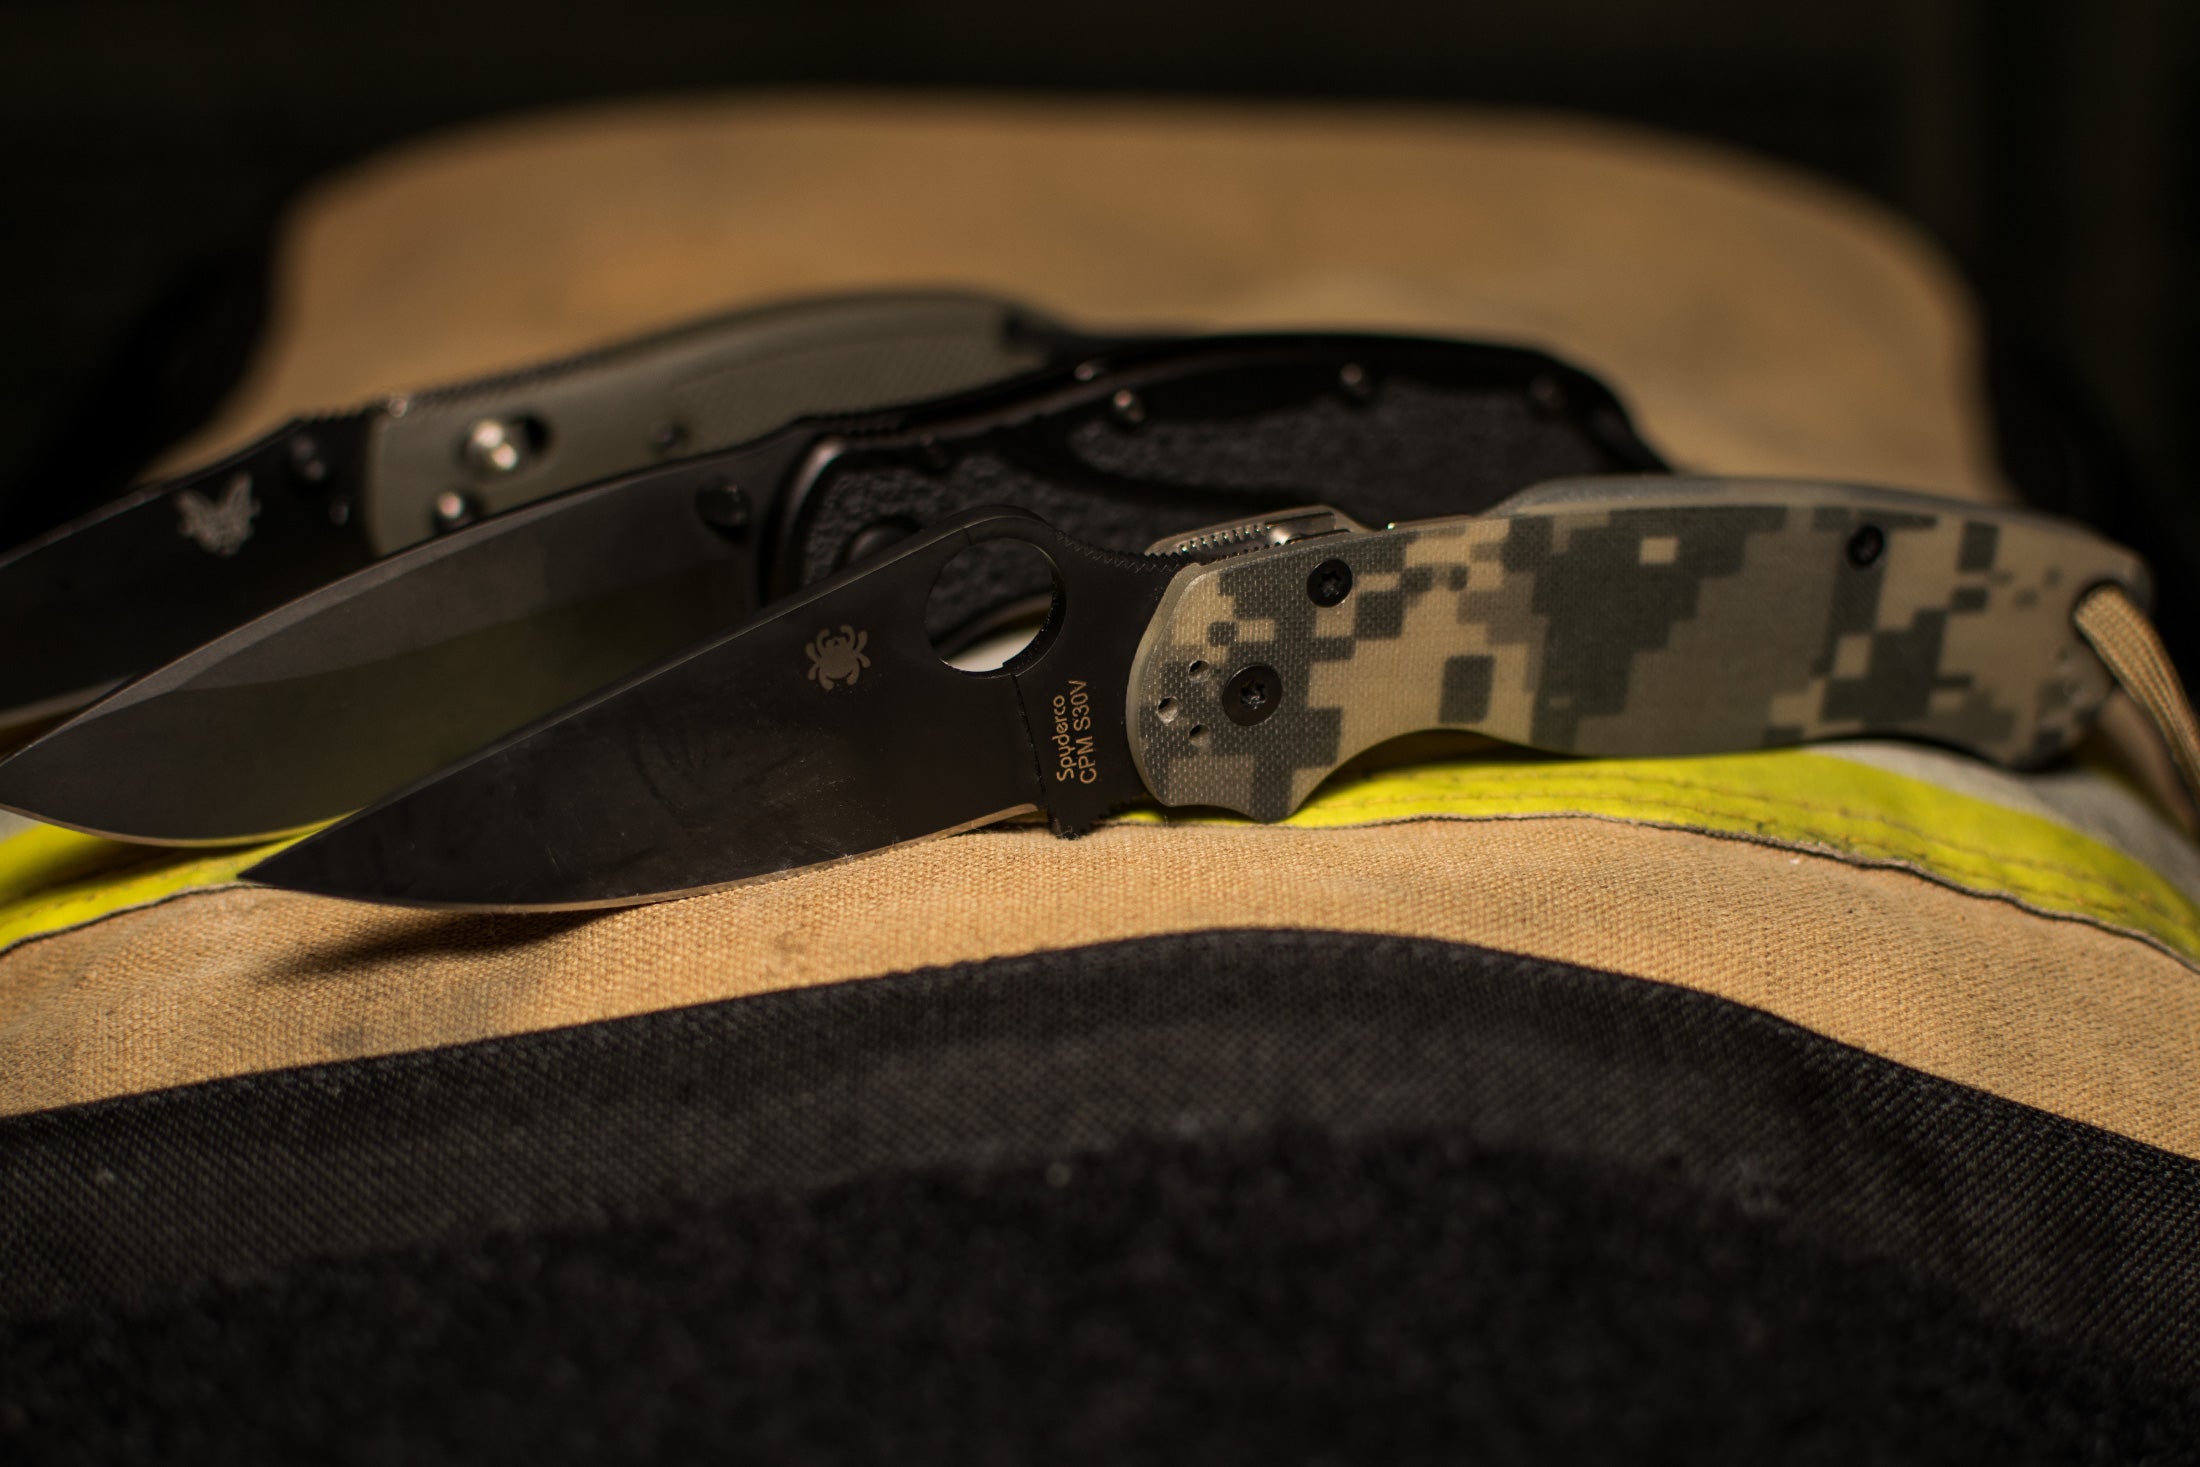 Best Everyday Carry Knives of 2016